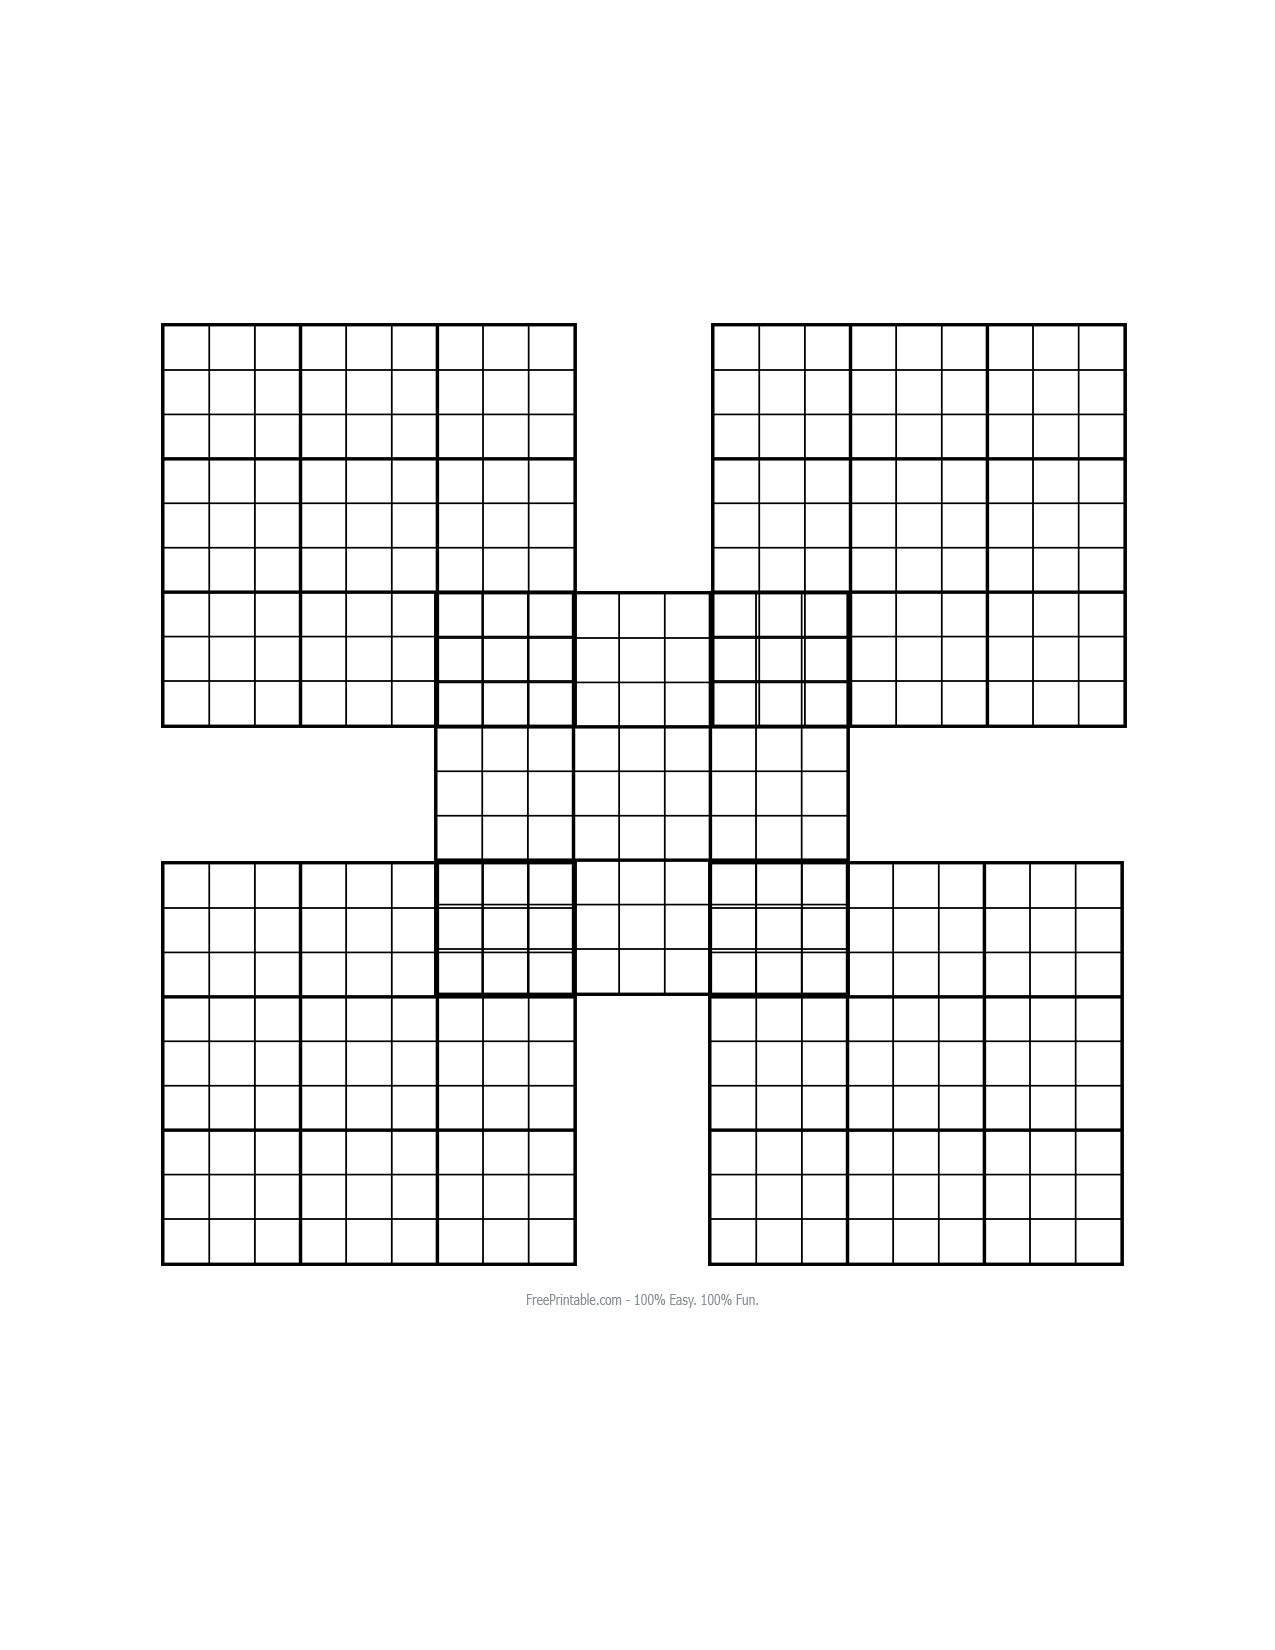 4-best-images-of-printable-blank-sudoku-puzzles-printable-blank